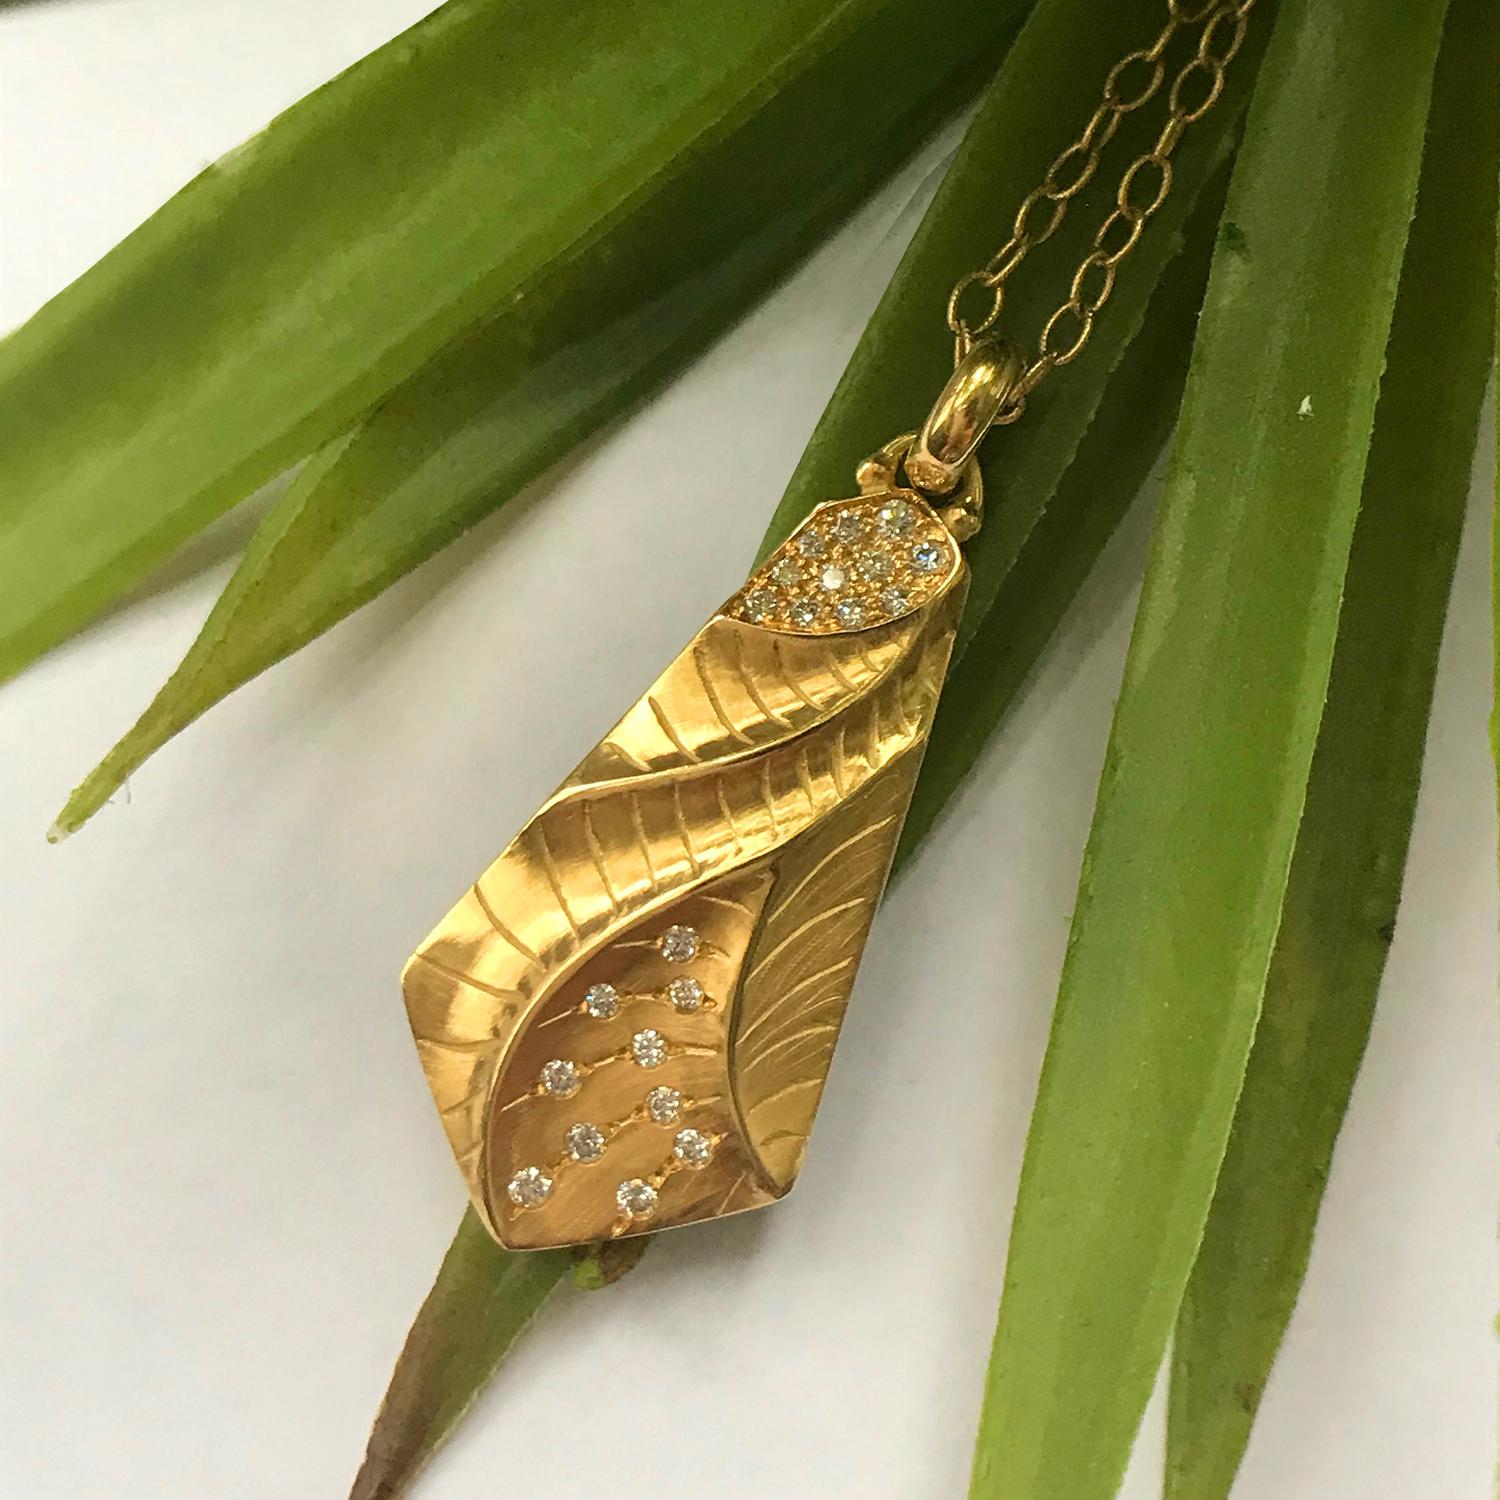 K. Mita's 14 Karat Yellow Gold Kite Pendant is accented with 0.25 Carats Diamonds (total weight). Handmade by the artist, the contemporary pendant from her Sand Dune Collection is 40 mm long and 17 mm wide18K yellow gold chain is 16